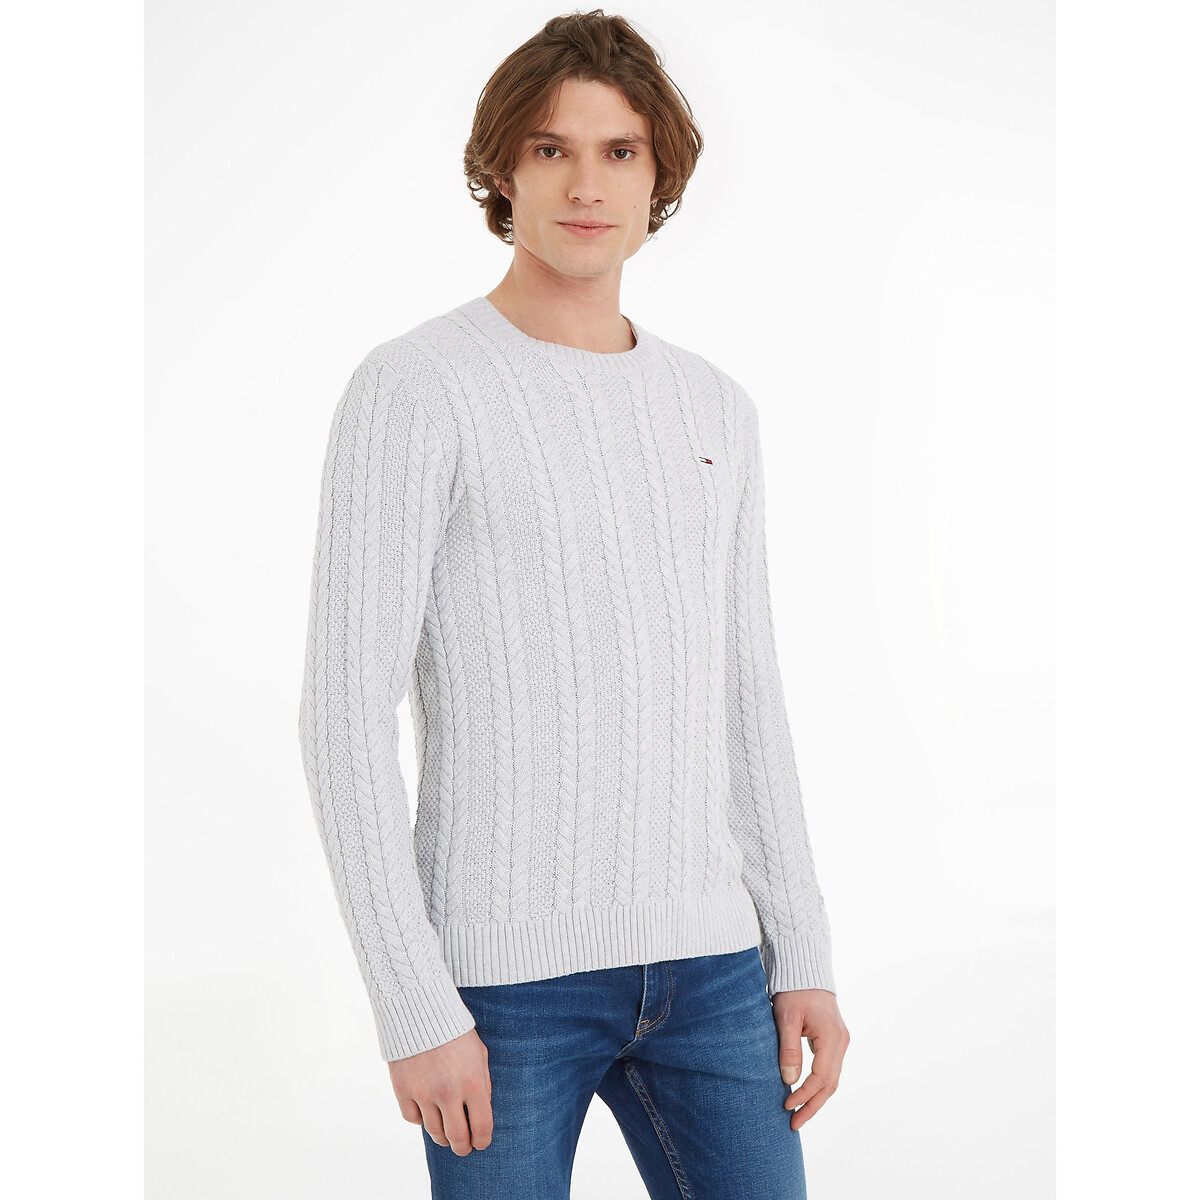 TOMMY JEANS Trui met ronde hals, in kabeltricot, marineblauw